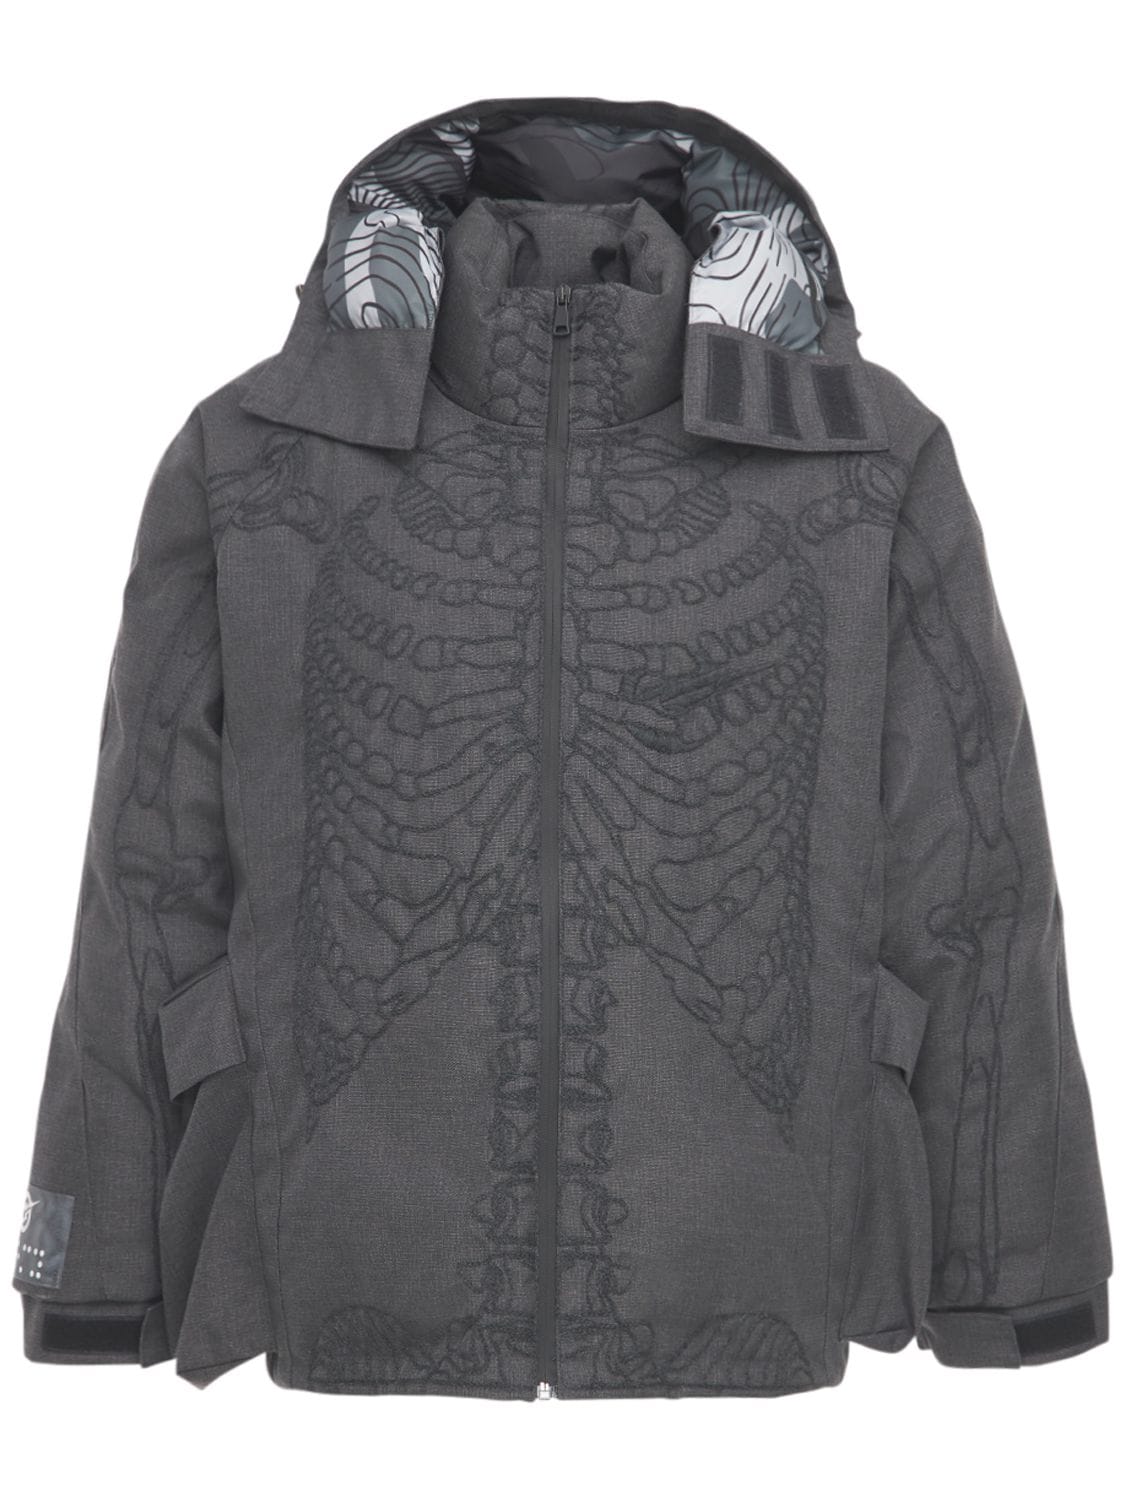 Ultrasound Embroidered Puffer Jacket